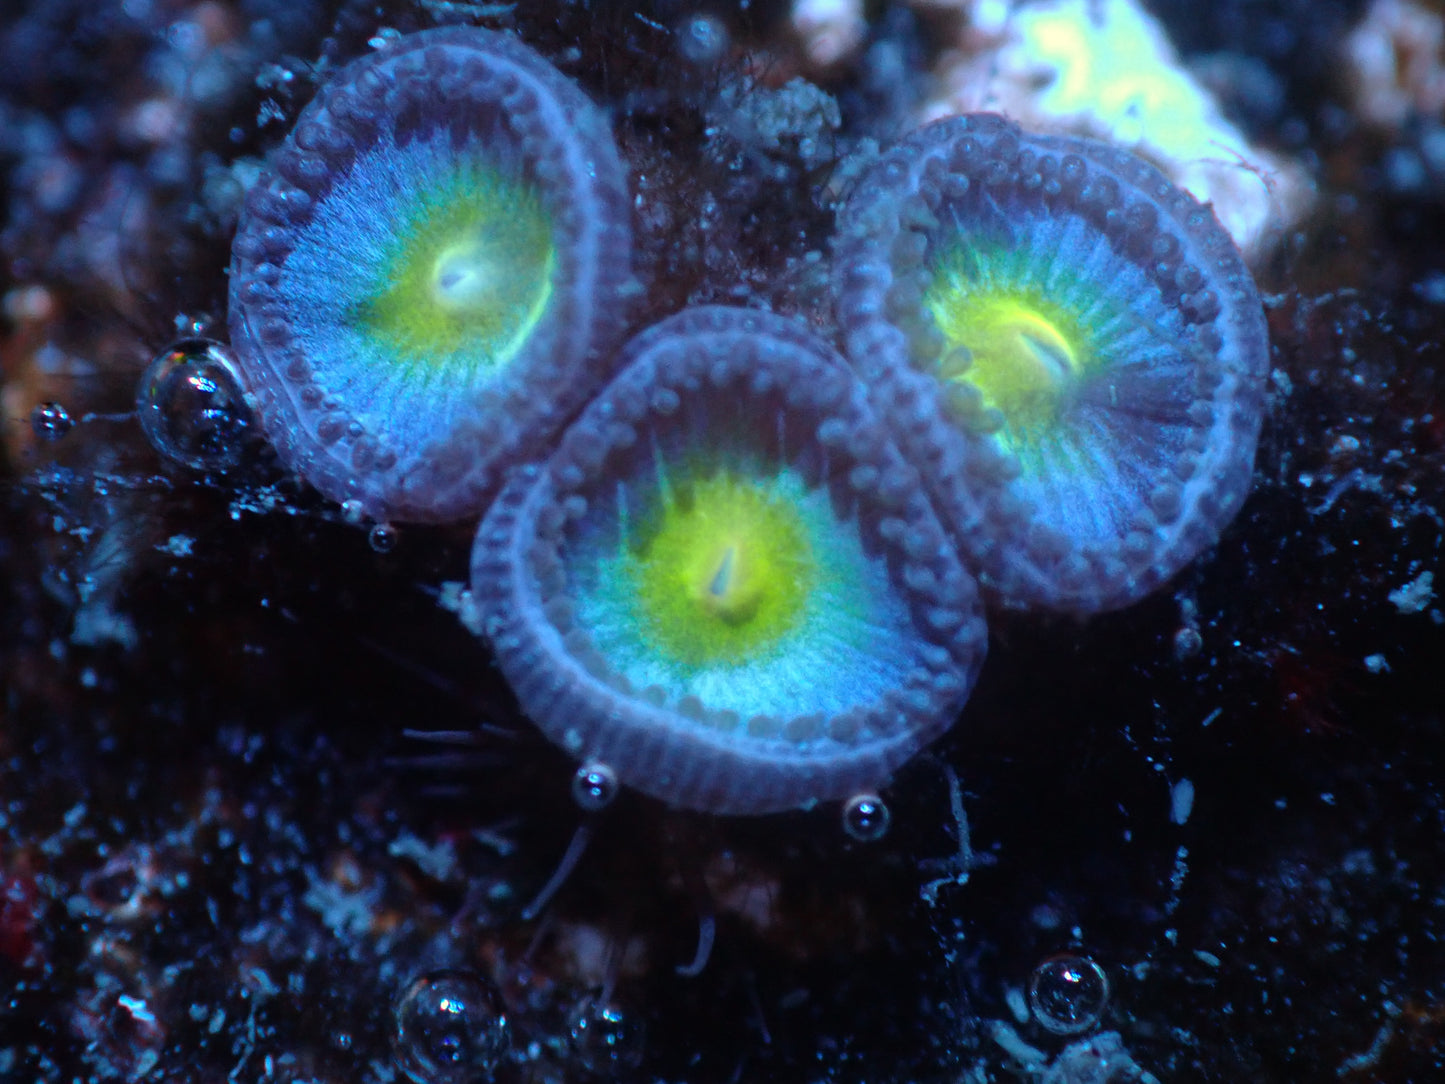 WWC AOI Zoas Auctions 5/3 ended